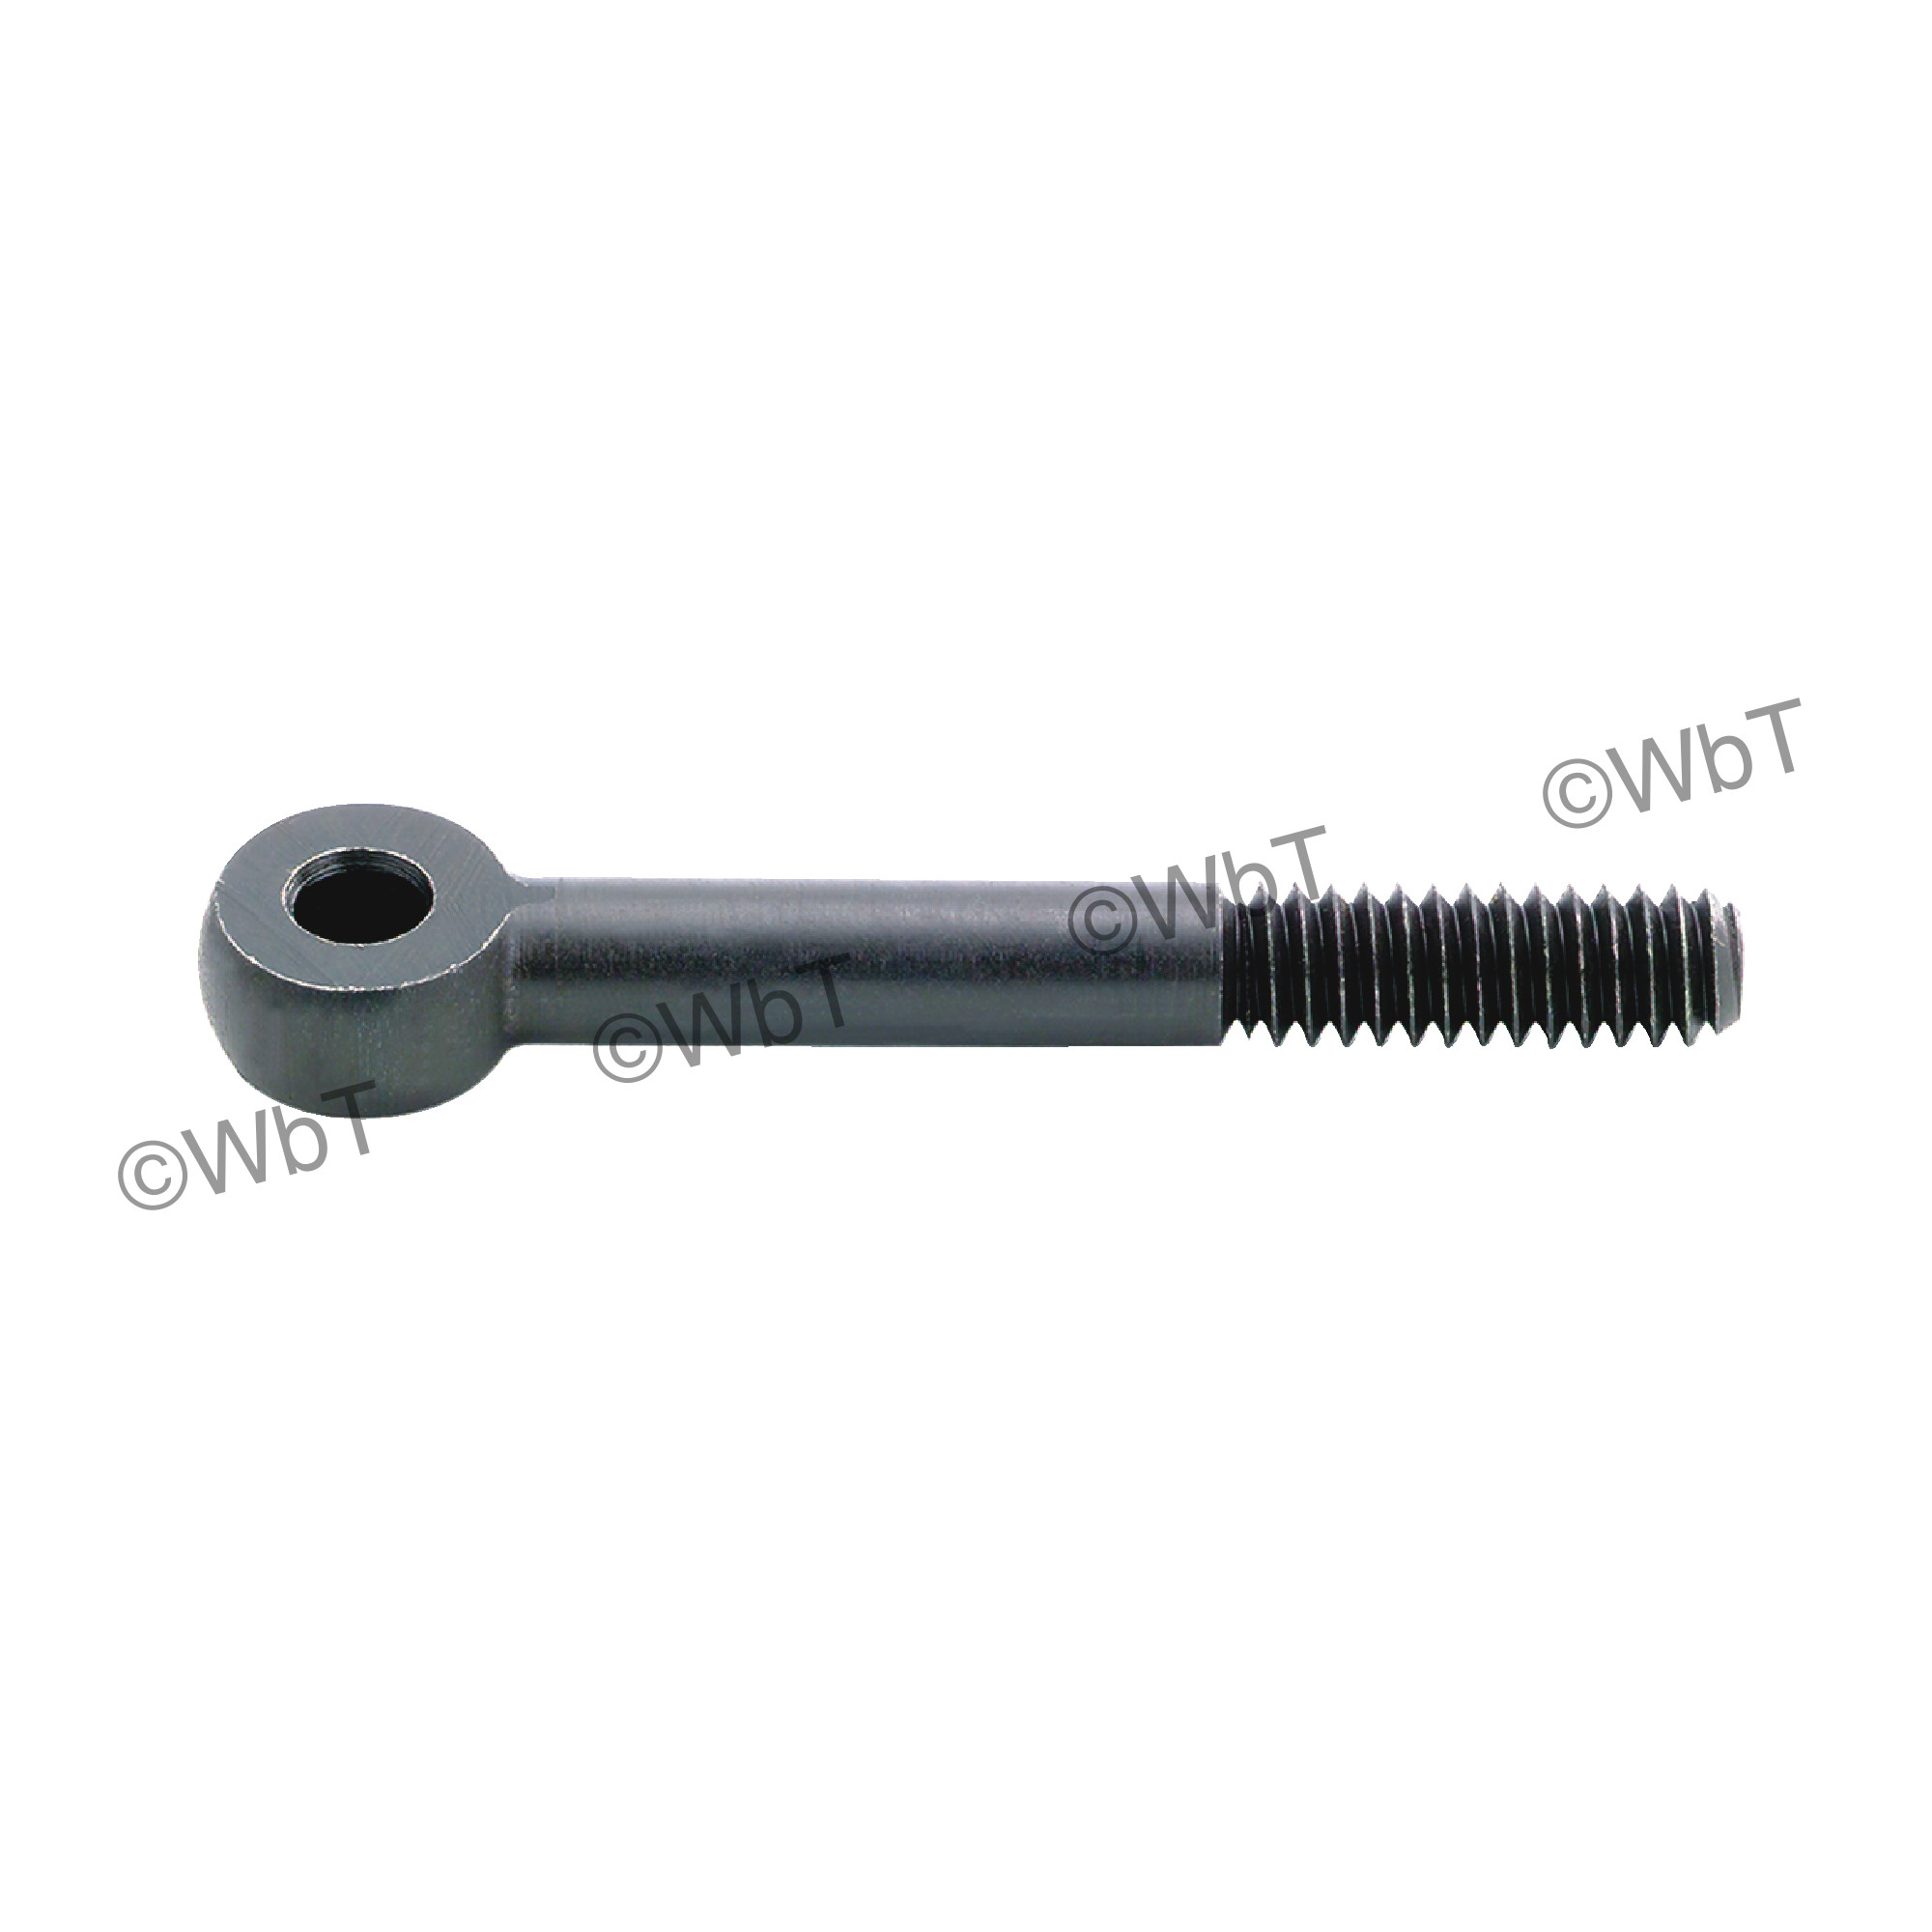 Steel Eye Bolt with Shoulder - Not For Lifting